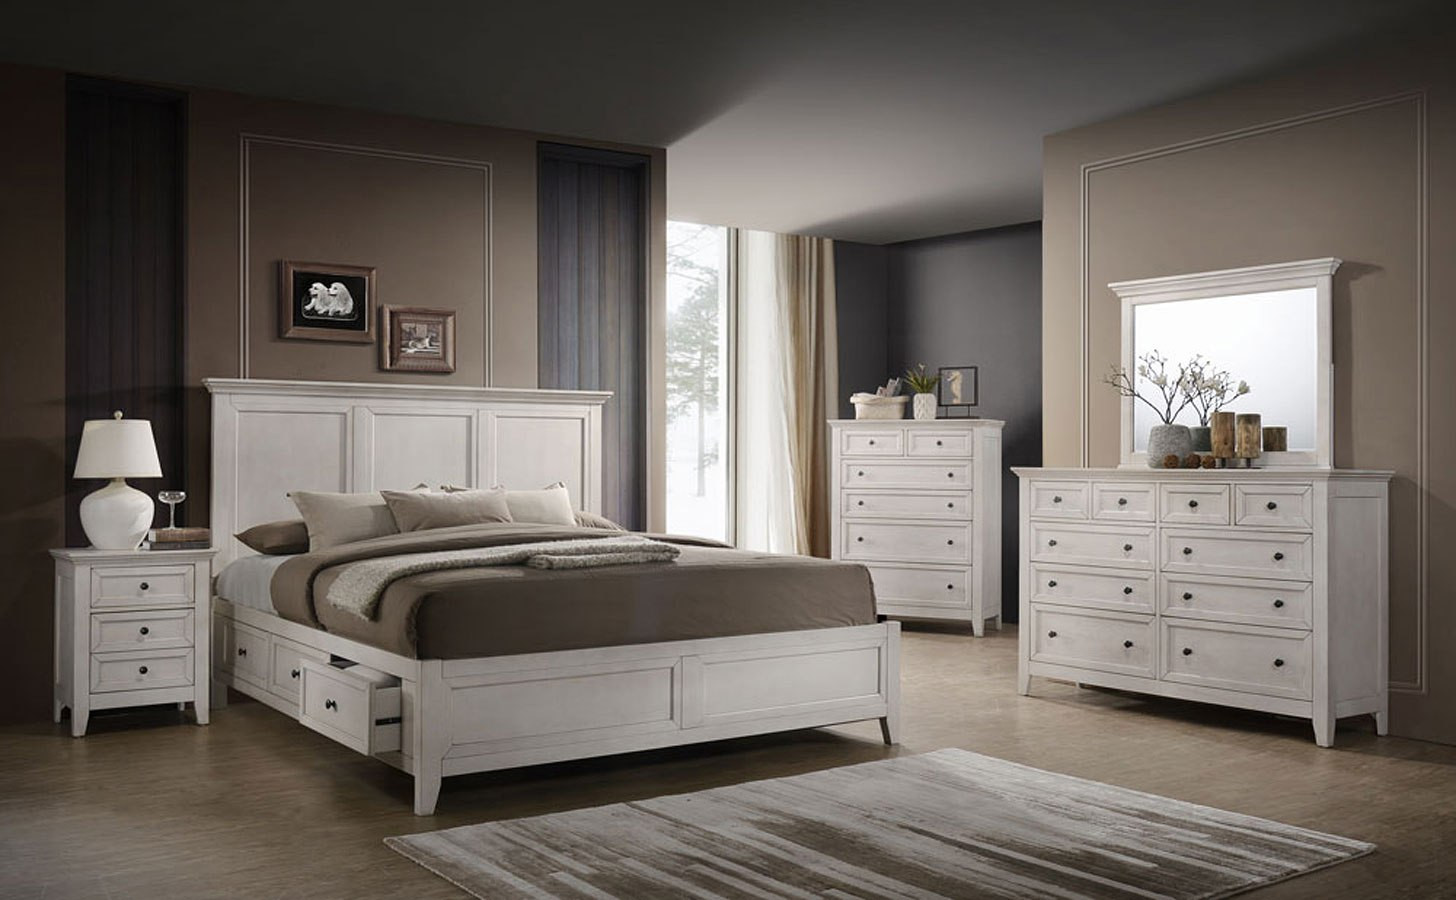 Rustic White Bedroom Furniture
 San Mateo Storage Bedroom Set Rustic White by Intercon